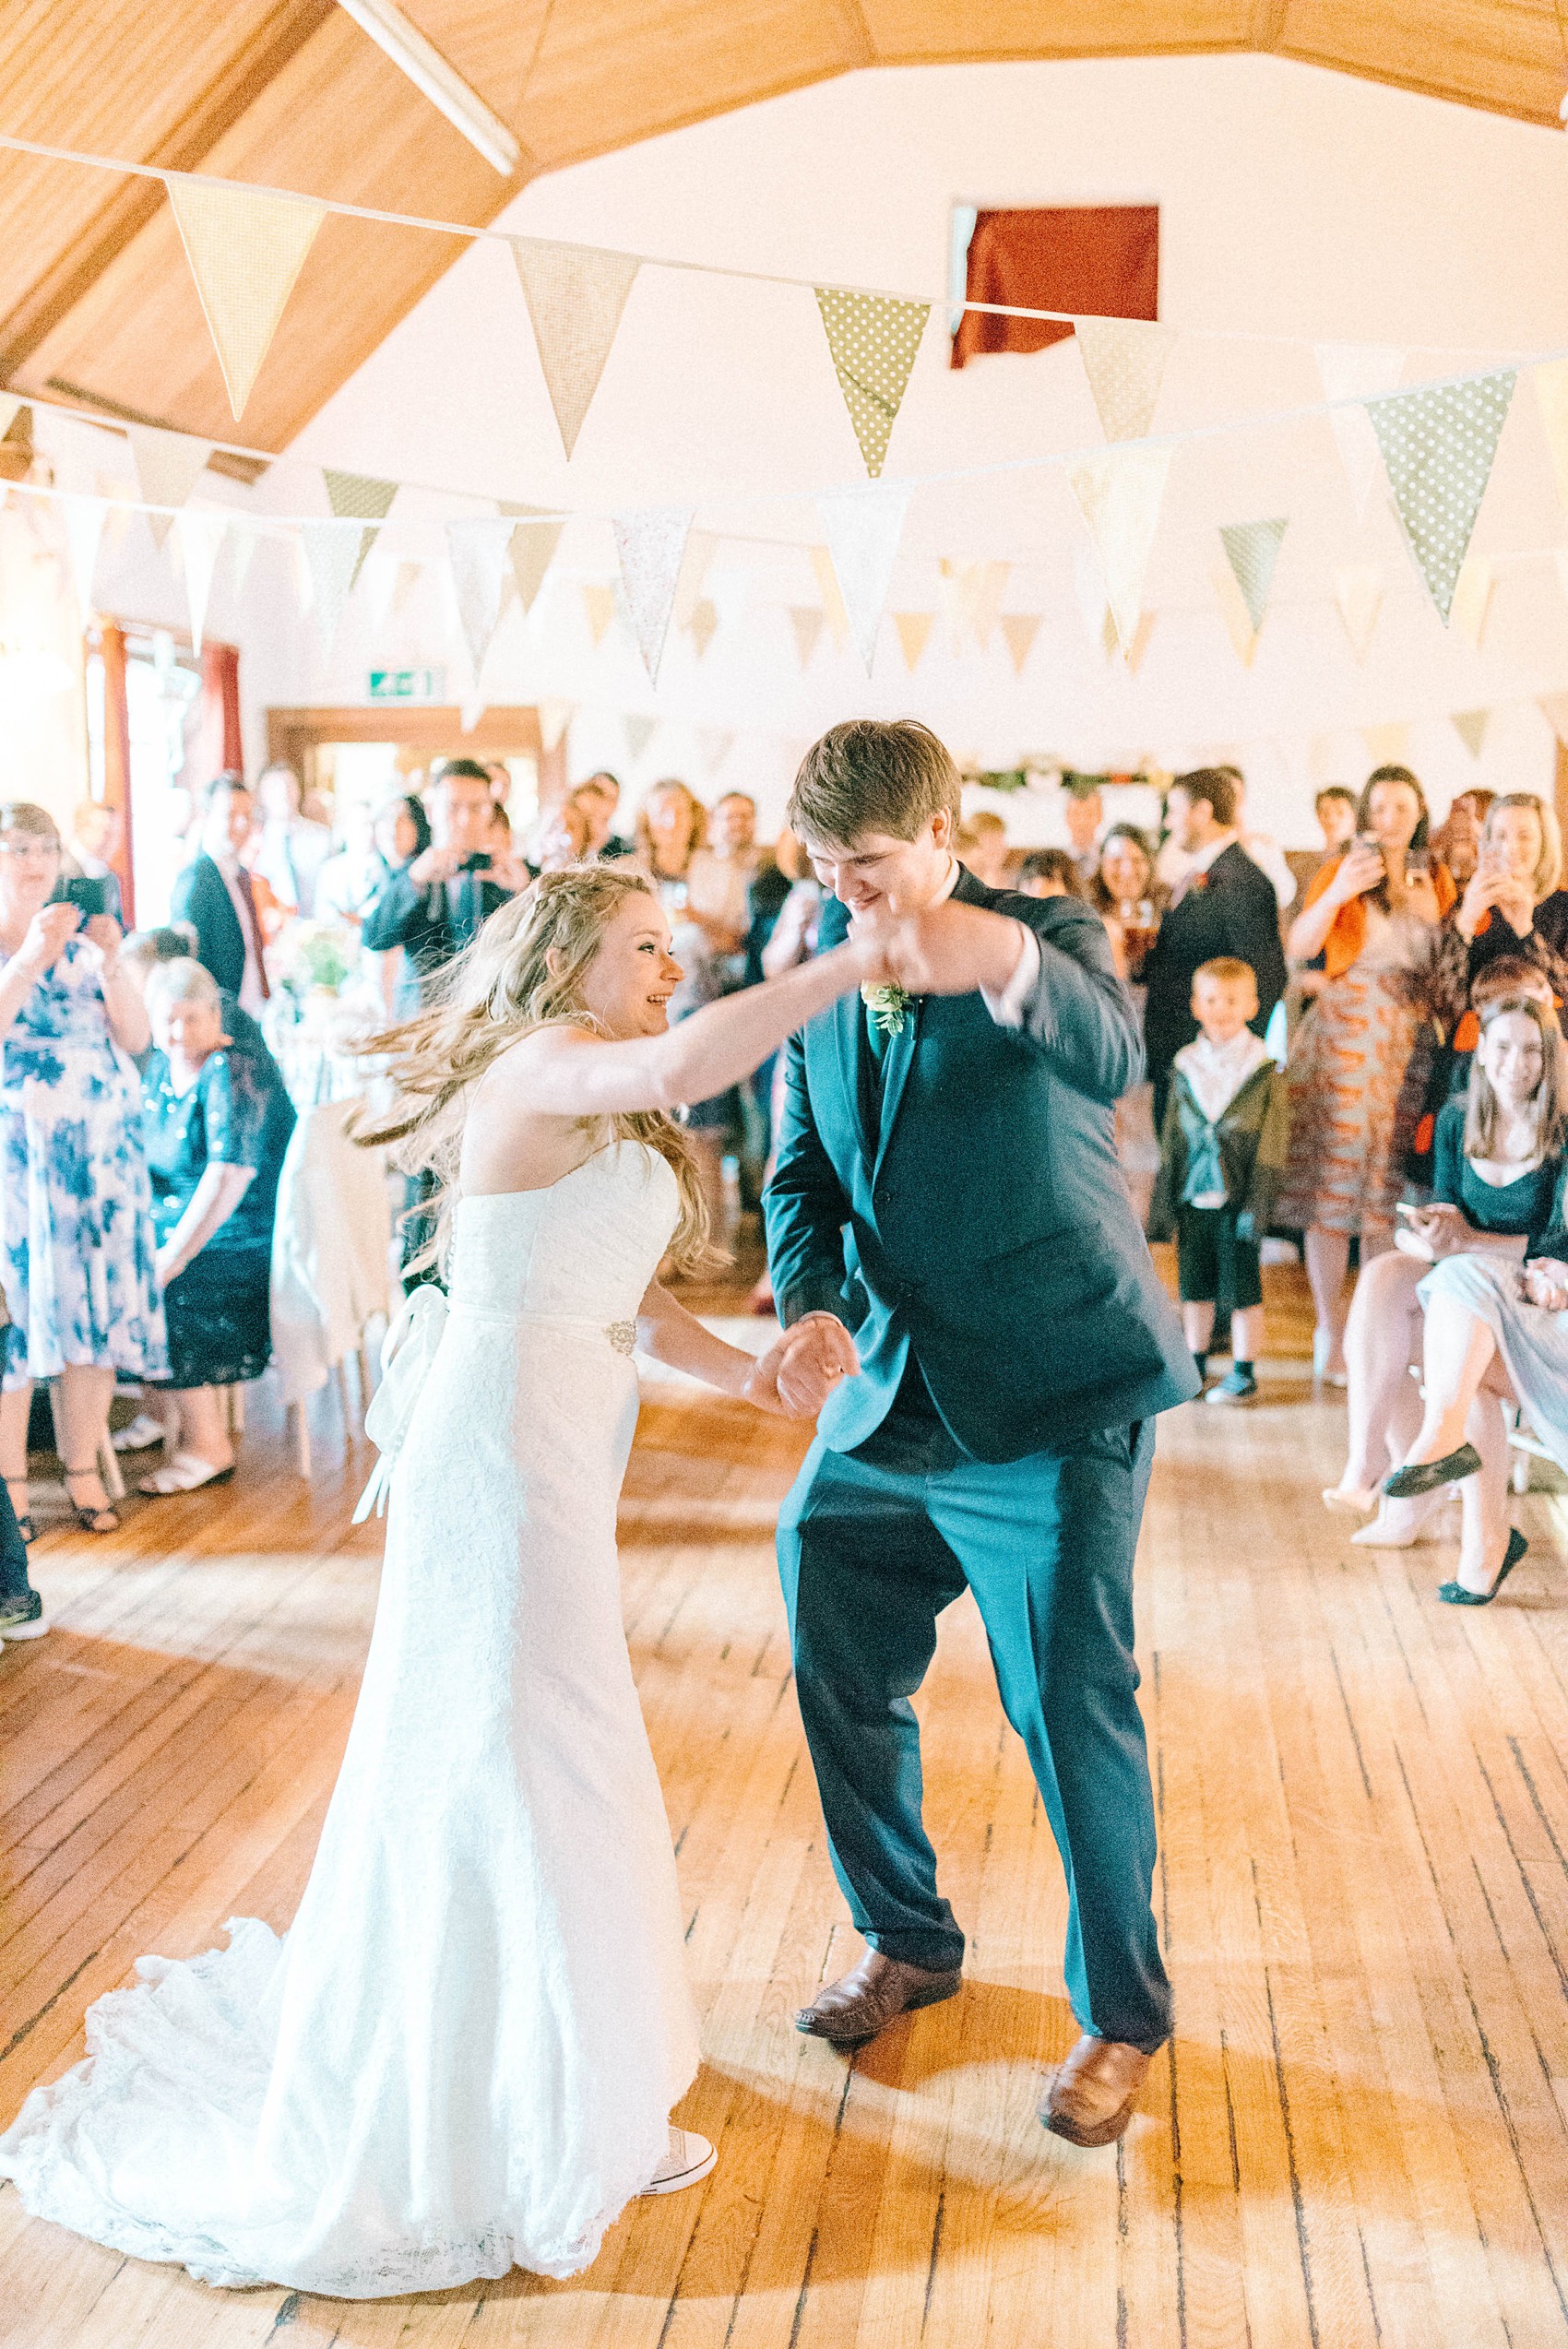 Sunny village Hall wedding North Yorkshire  - A 70's Inspired Bohemian Dress for a Sunny, Spring Village Hall Wedding in North Yorkshire